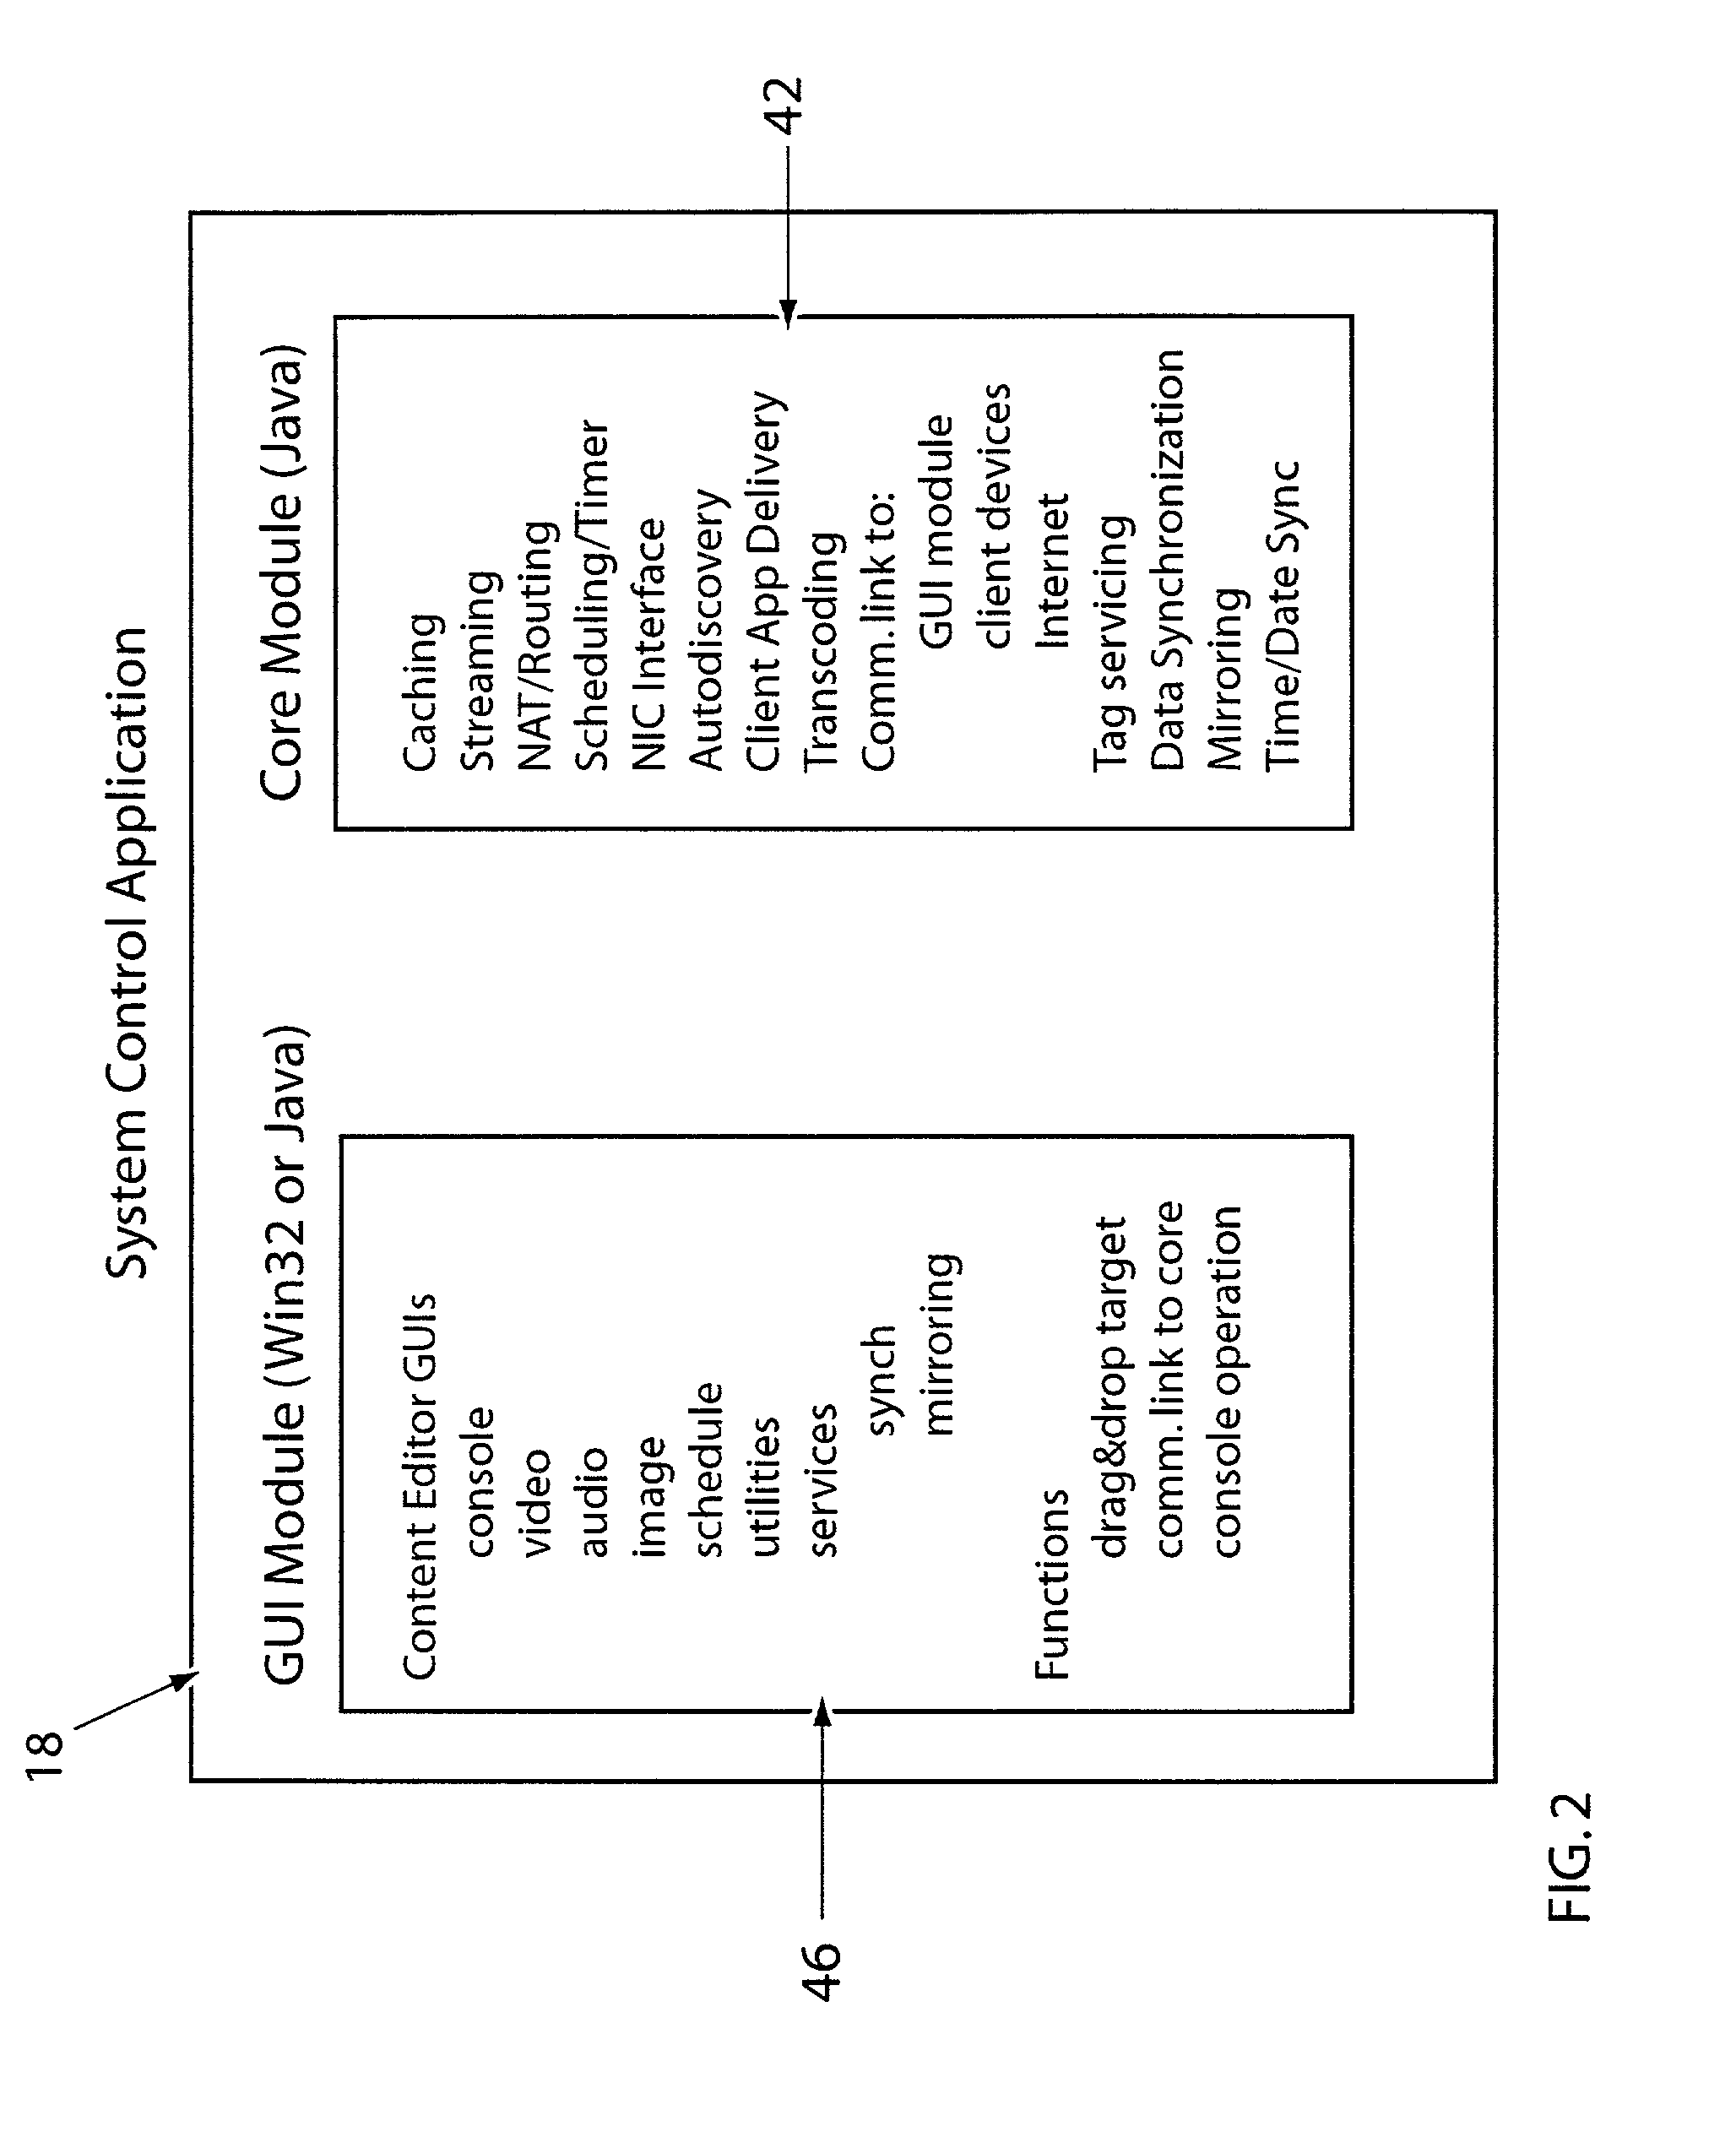 System for providing content, management, and interactivity for thin client devices